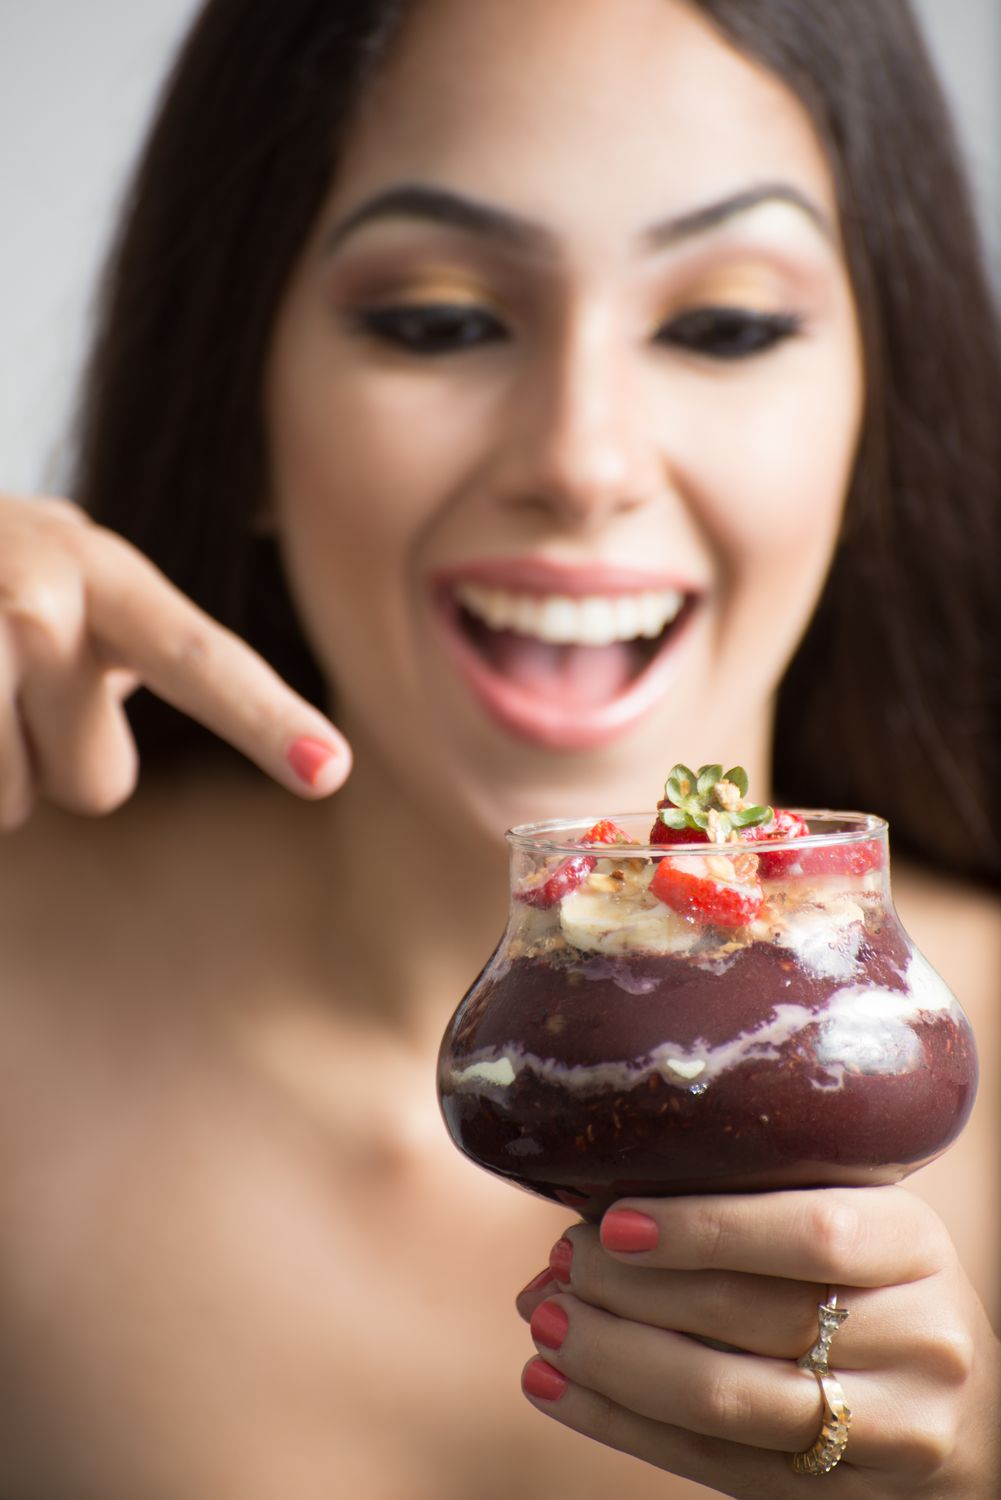 Learn how to market an acai bowls business and start reaching new customers. Discover the best marketing strategies that will help you bring more people into your delicious acai bowls business.